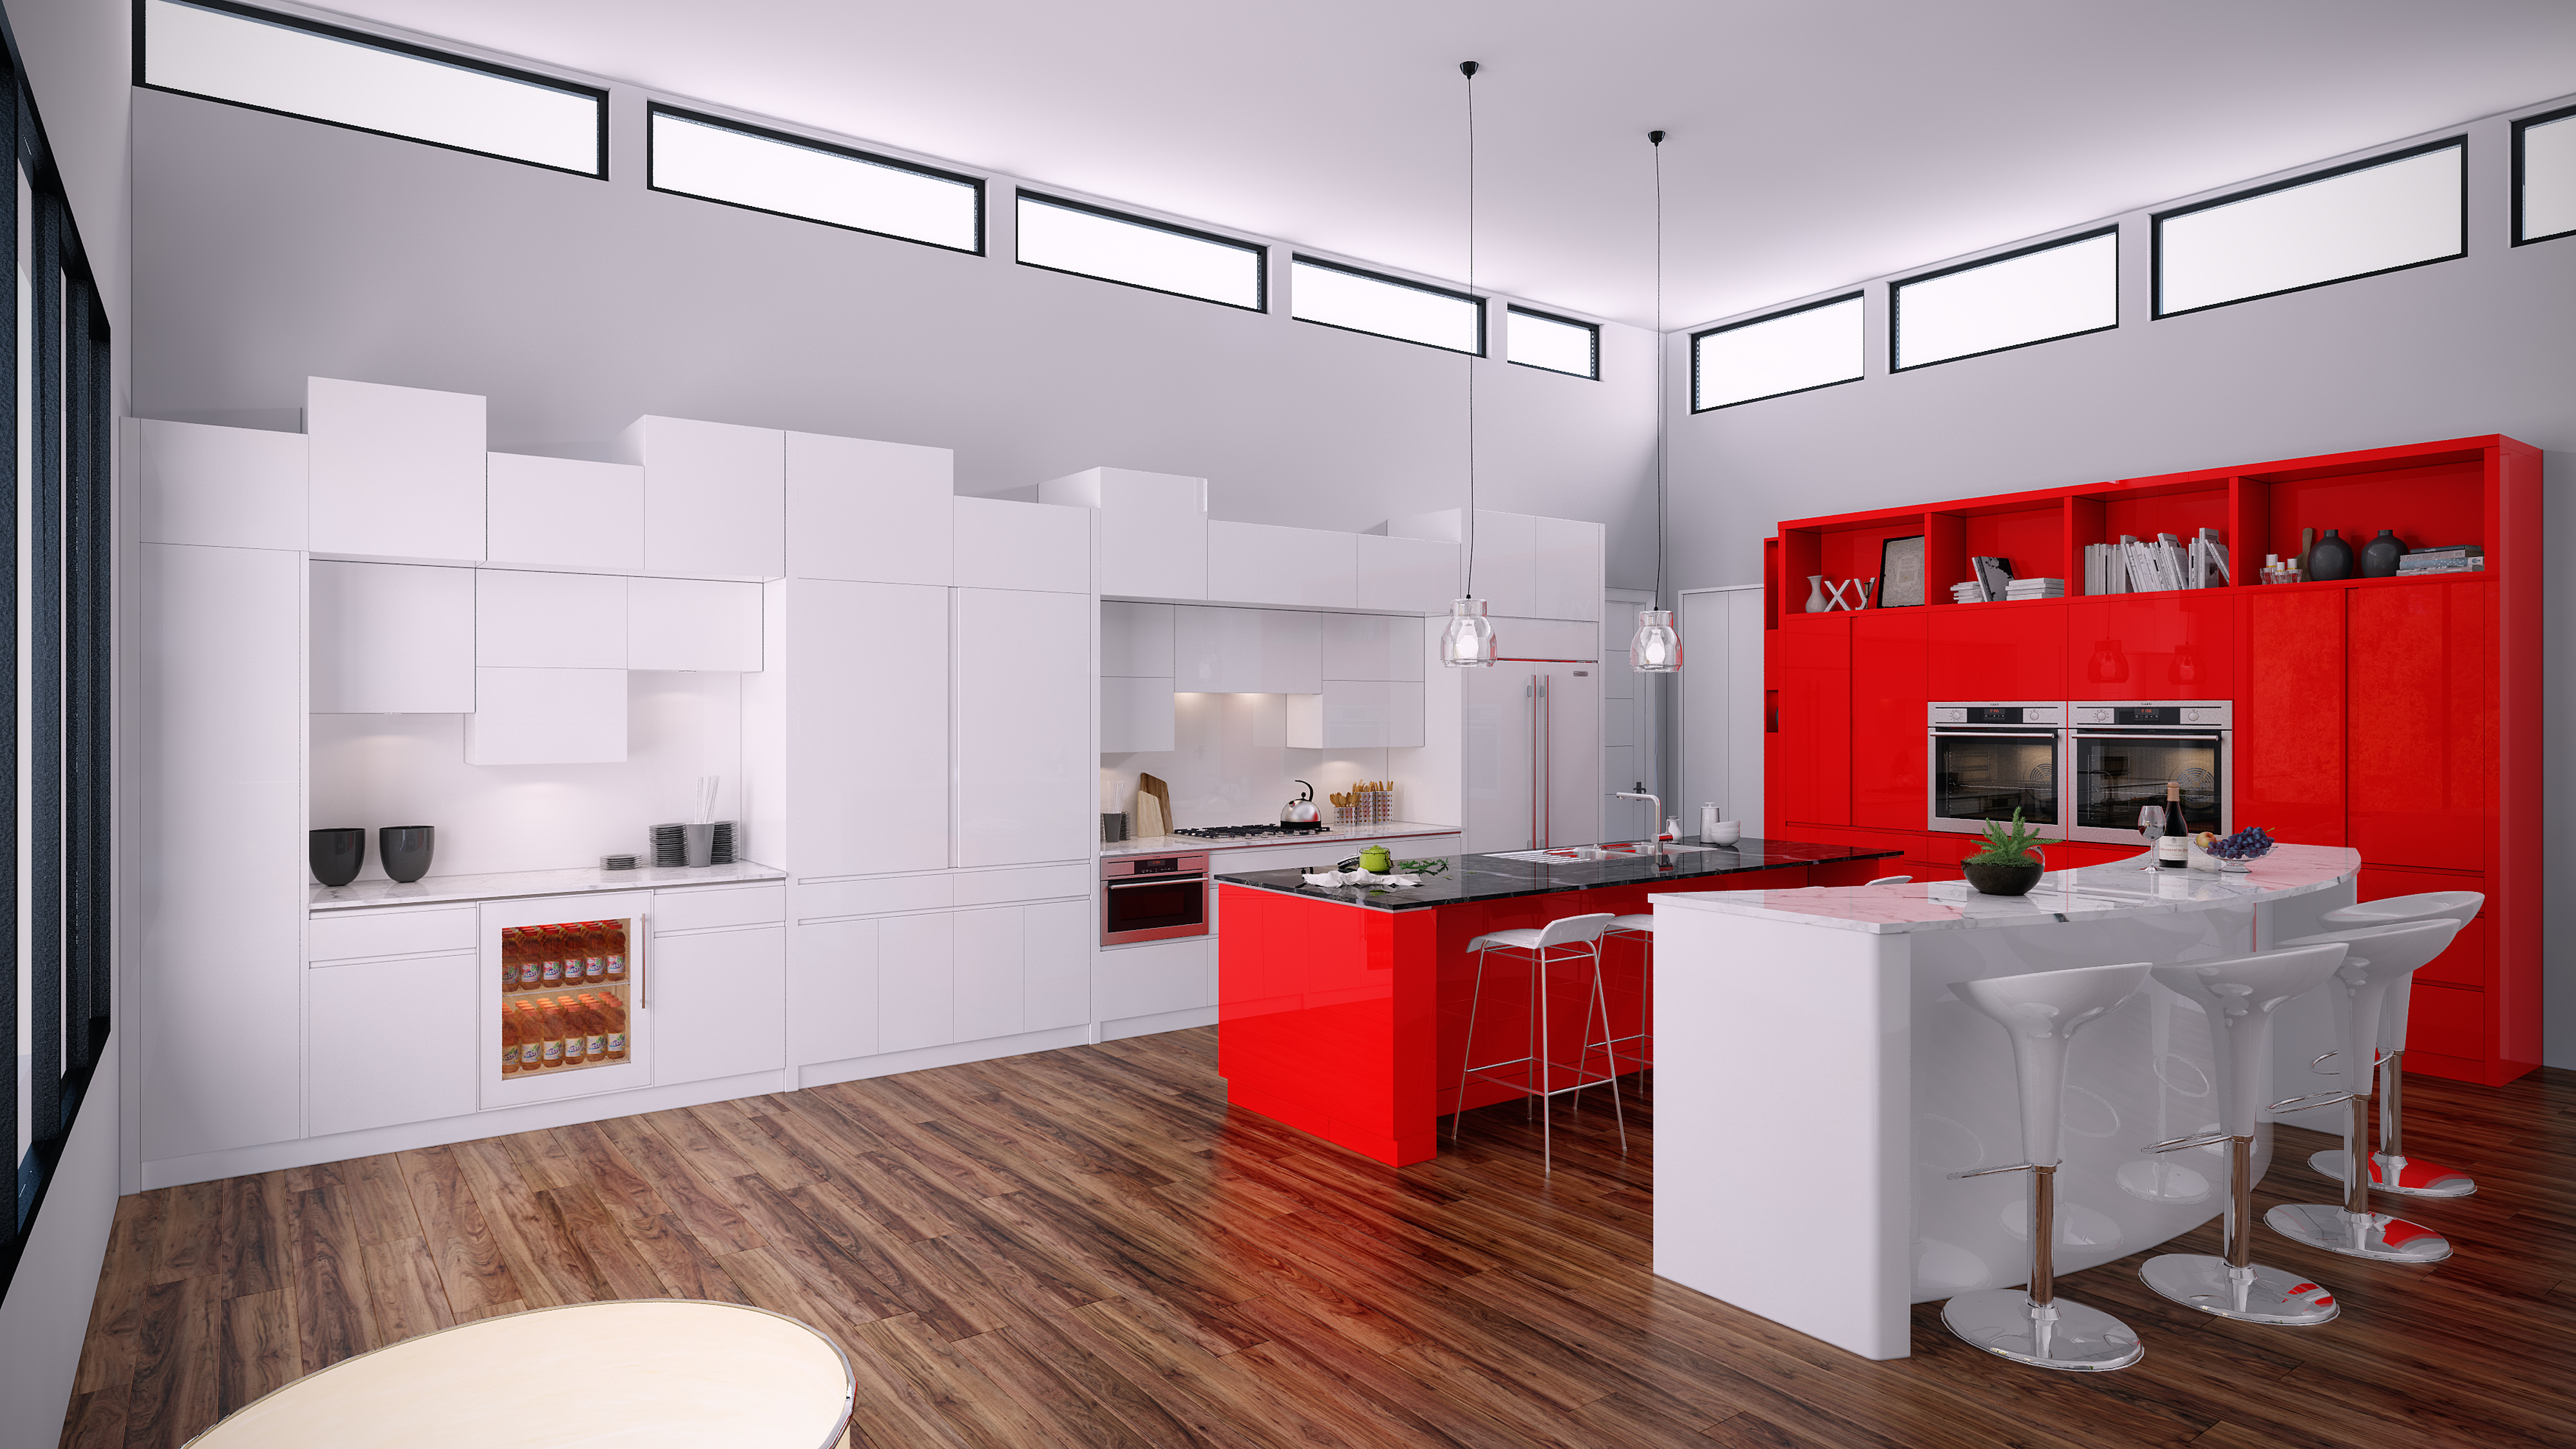 Kitchen with custom white and red cabinets